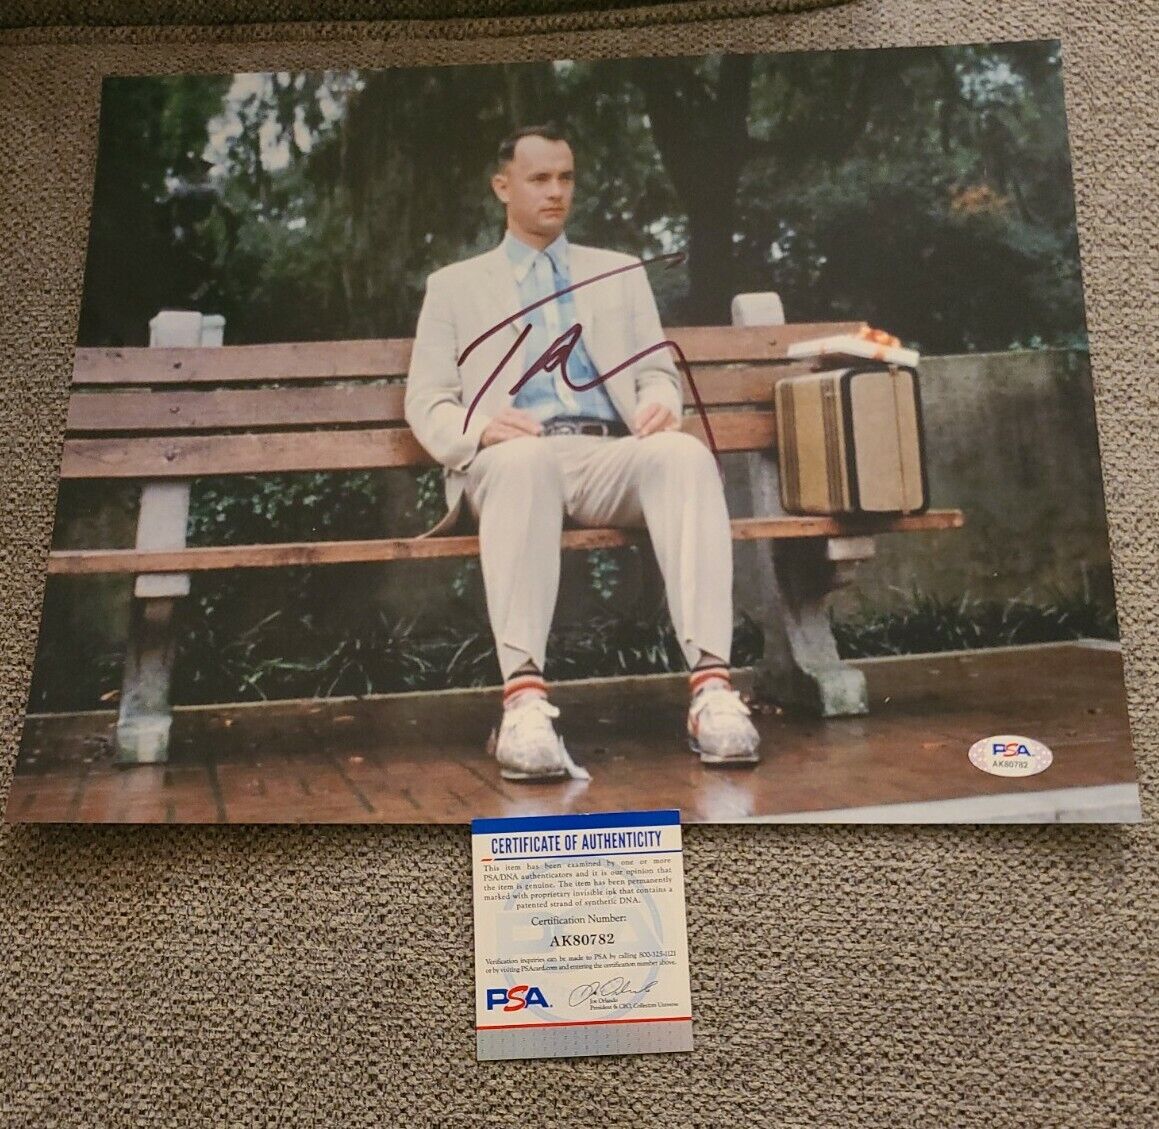 TOM HANKS SIGNED 11X14 PHOTO FORREST GUMP BENCH PSA/DNA AUTHENTICATED #AK80782